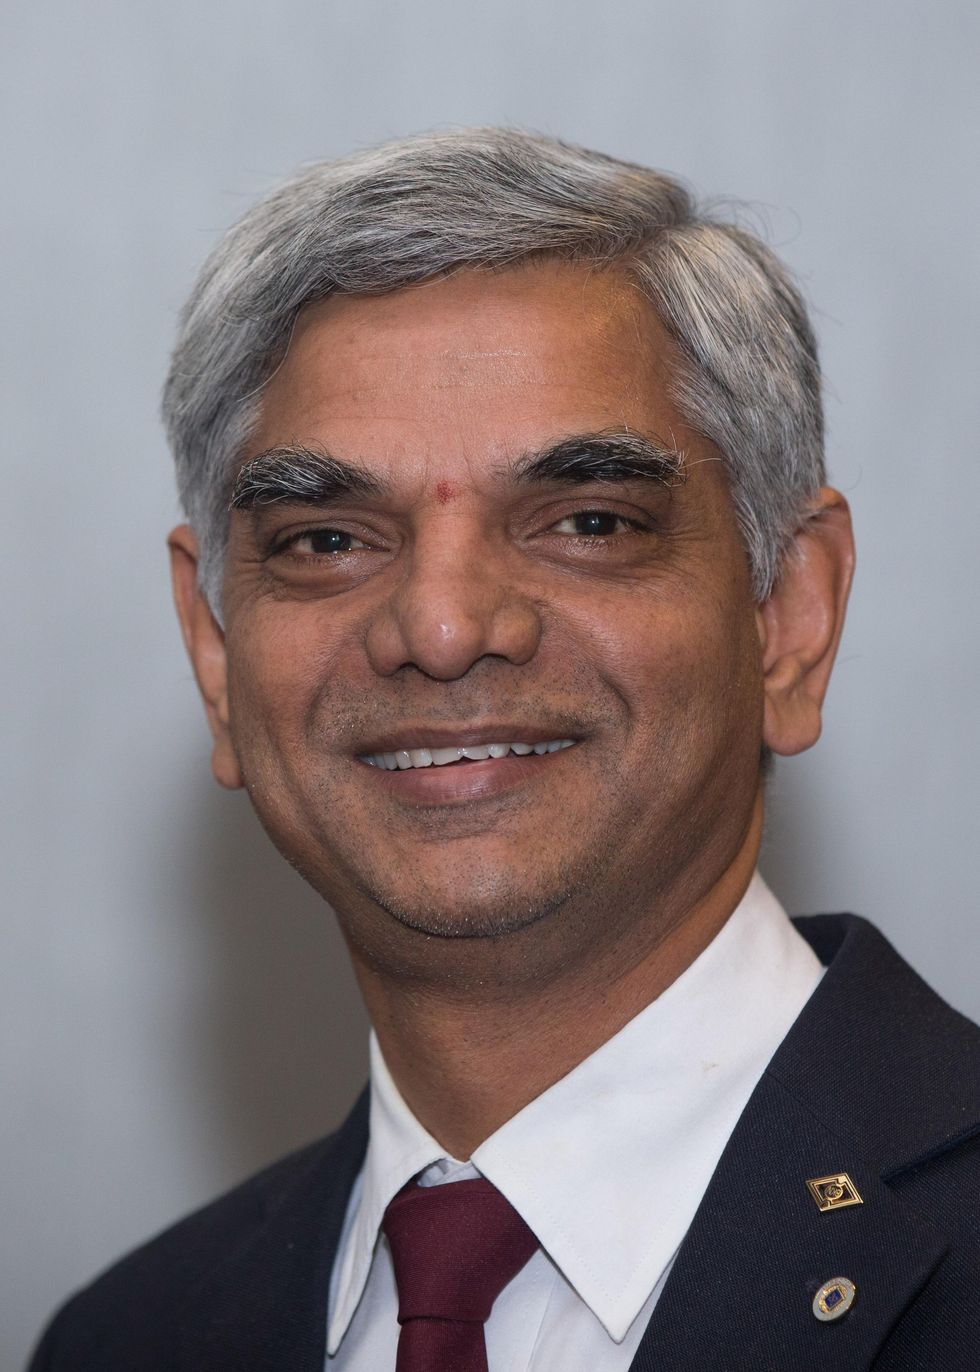 A photo of a man with grey hair and a blue jacket and red tie.